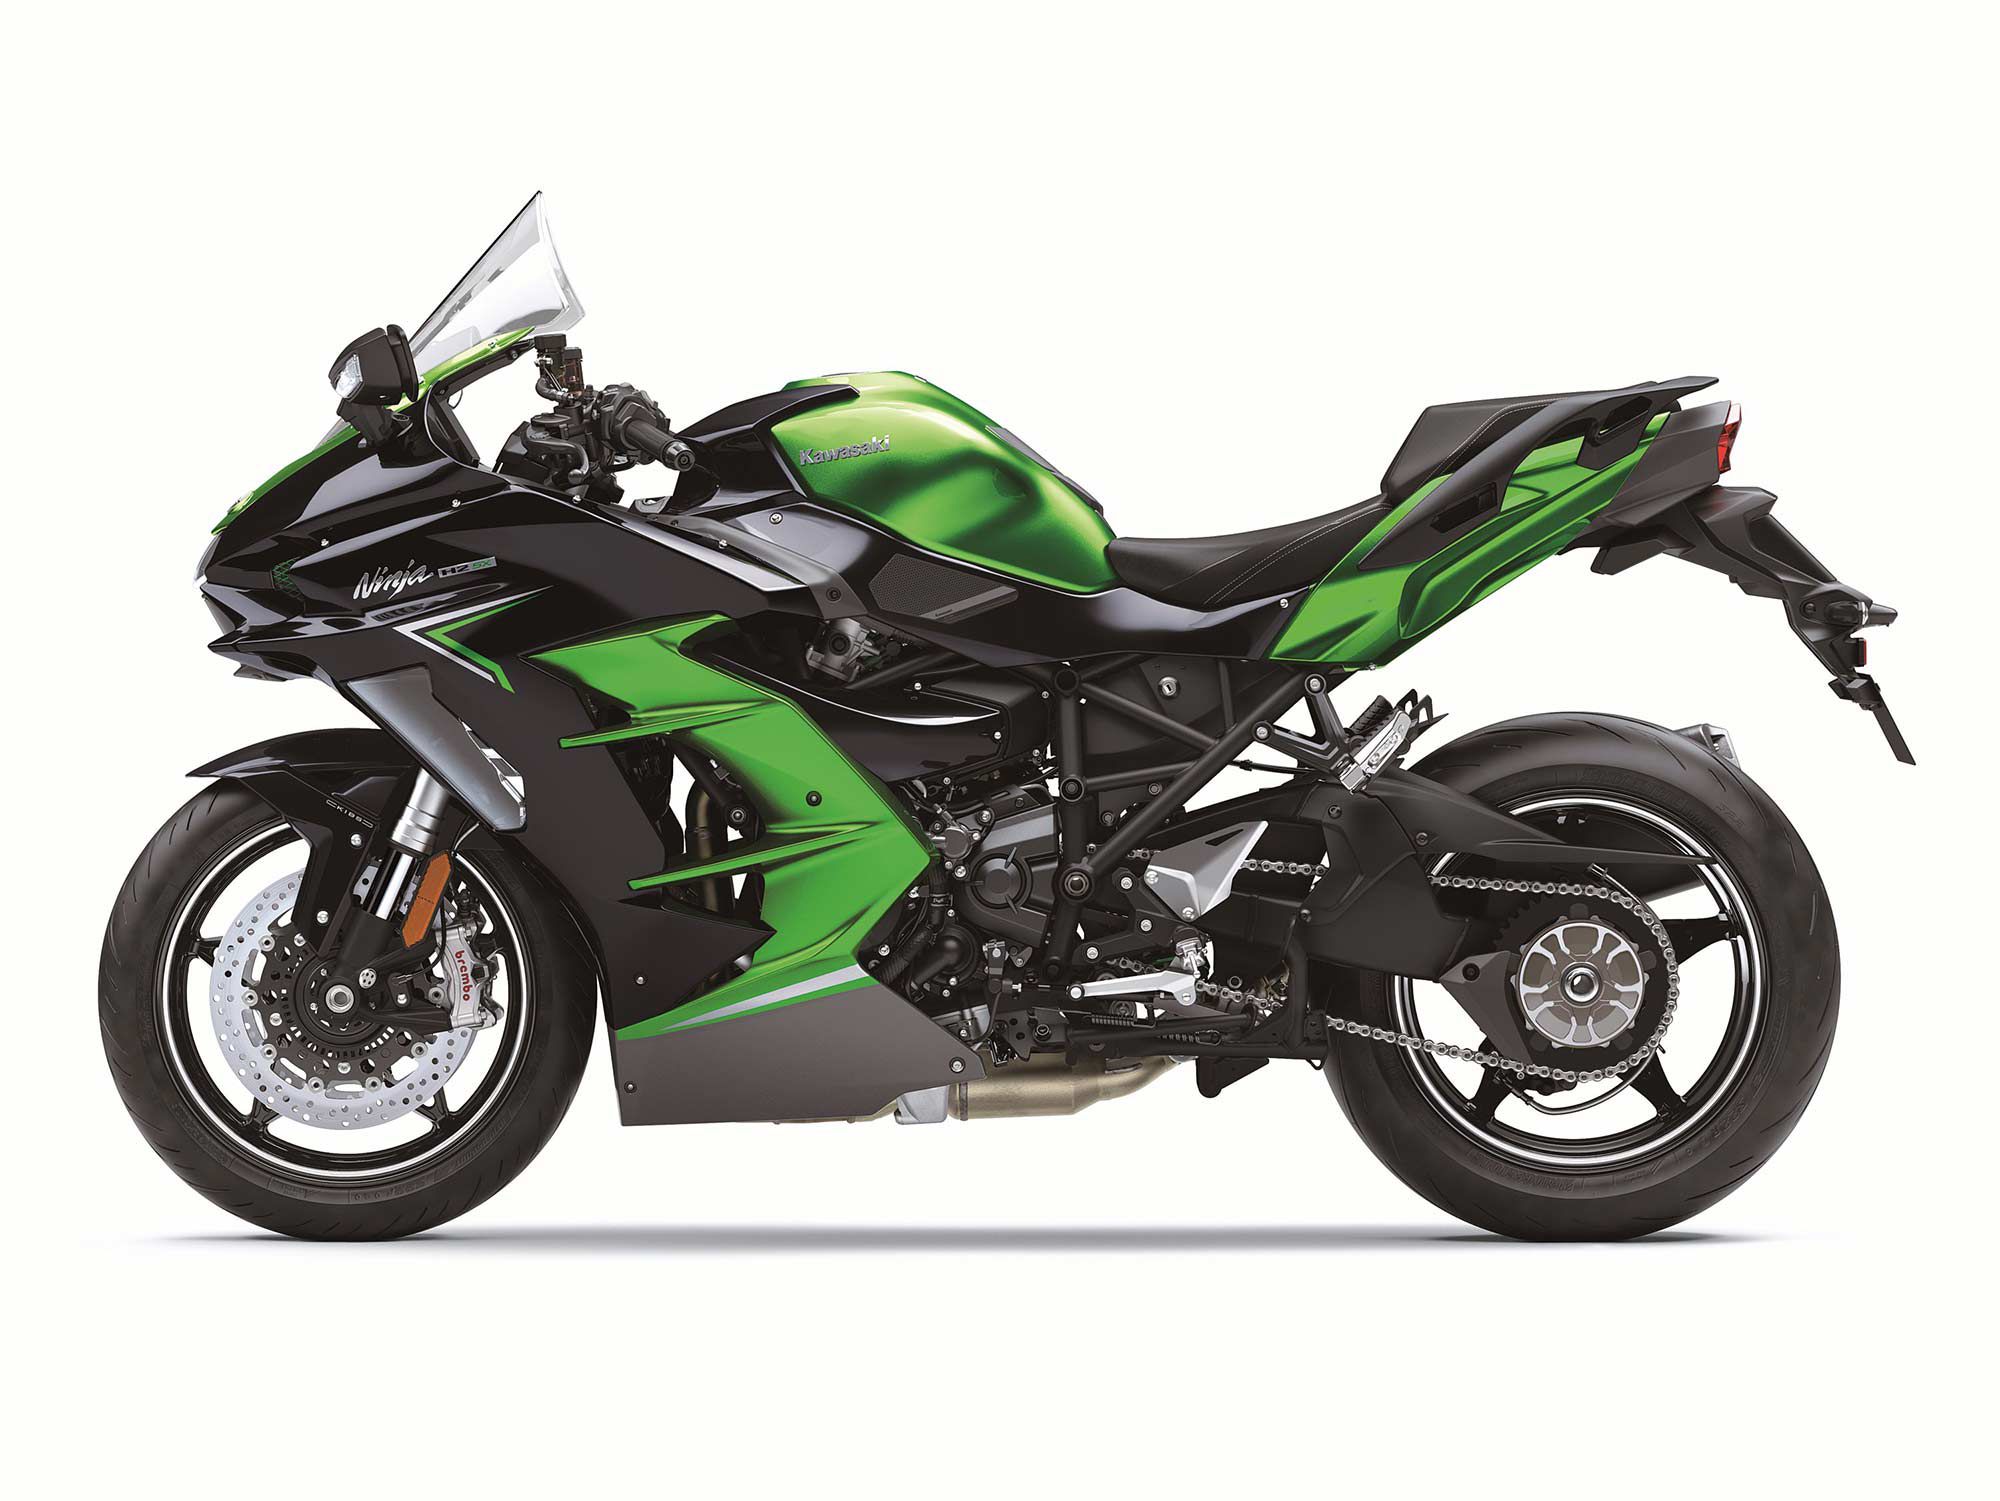 The 2022 Kawasaki Ninja H2 SX SE will only come in one colorway.